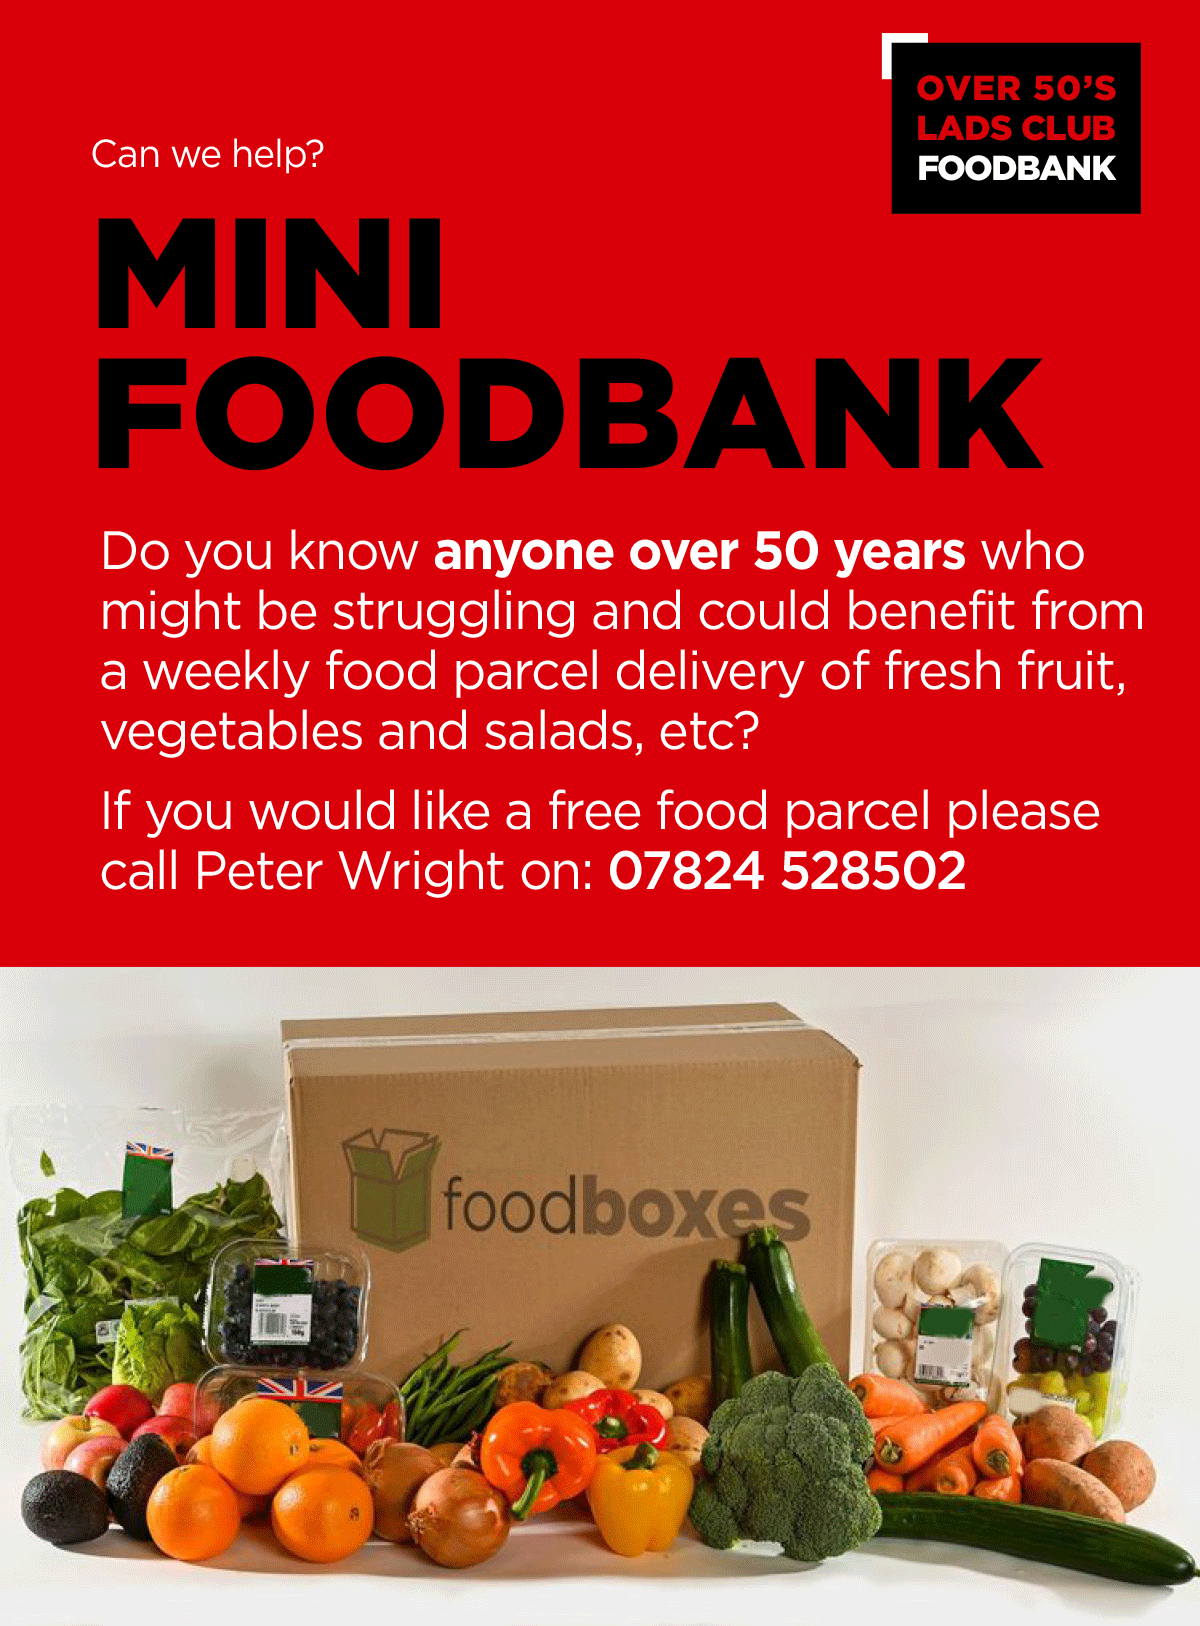 Appeal for volunteers for over 50's mini foodbank